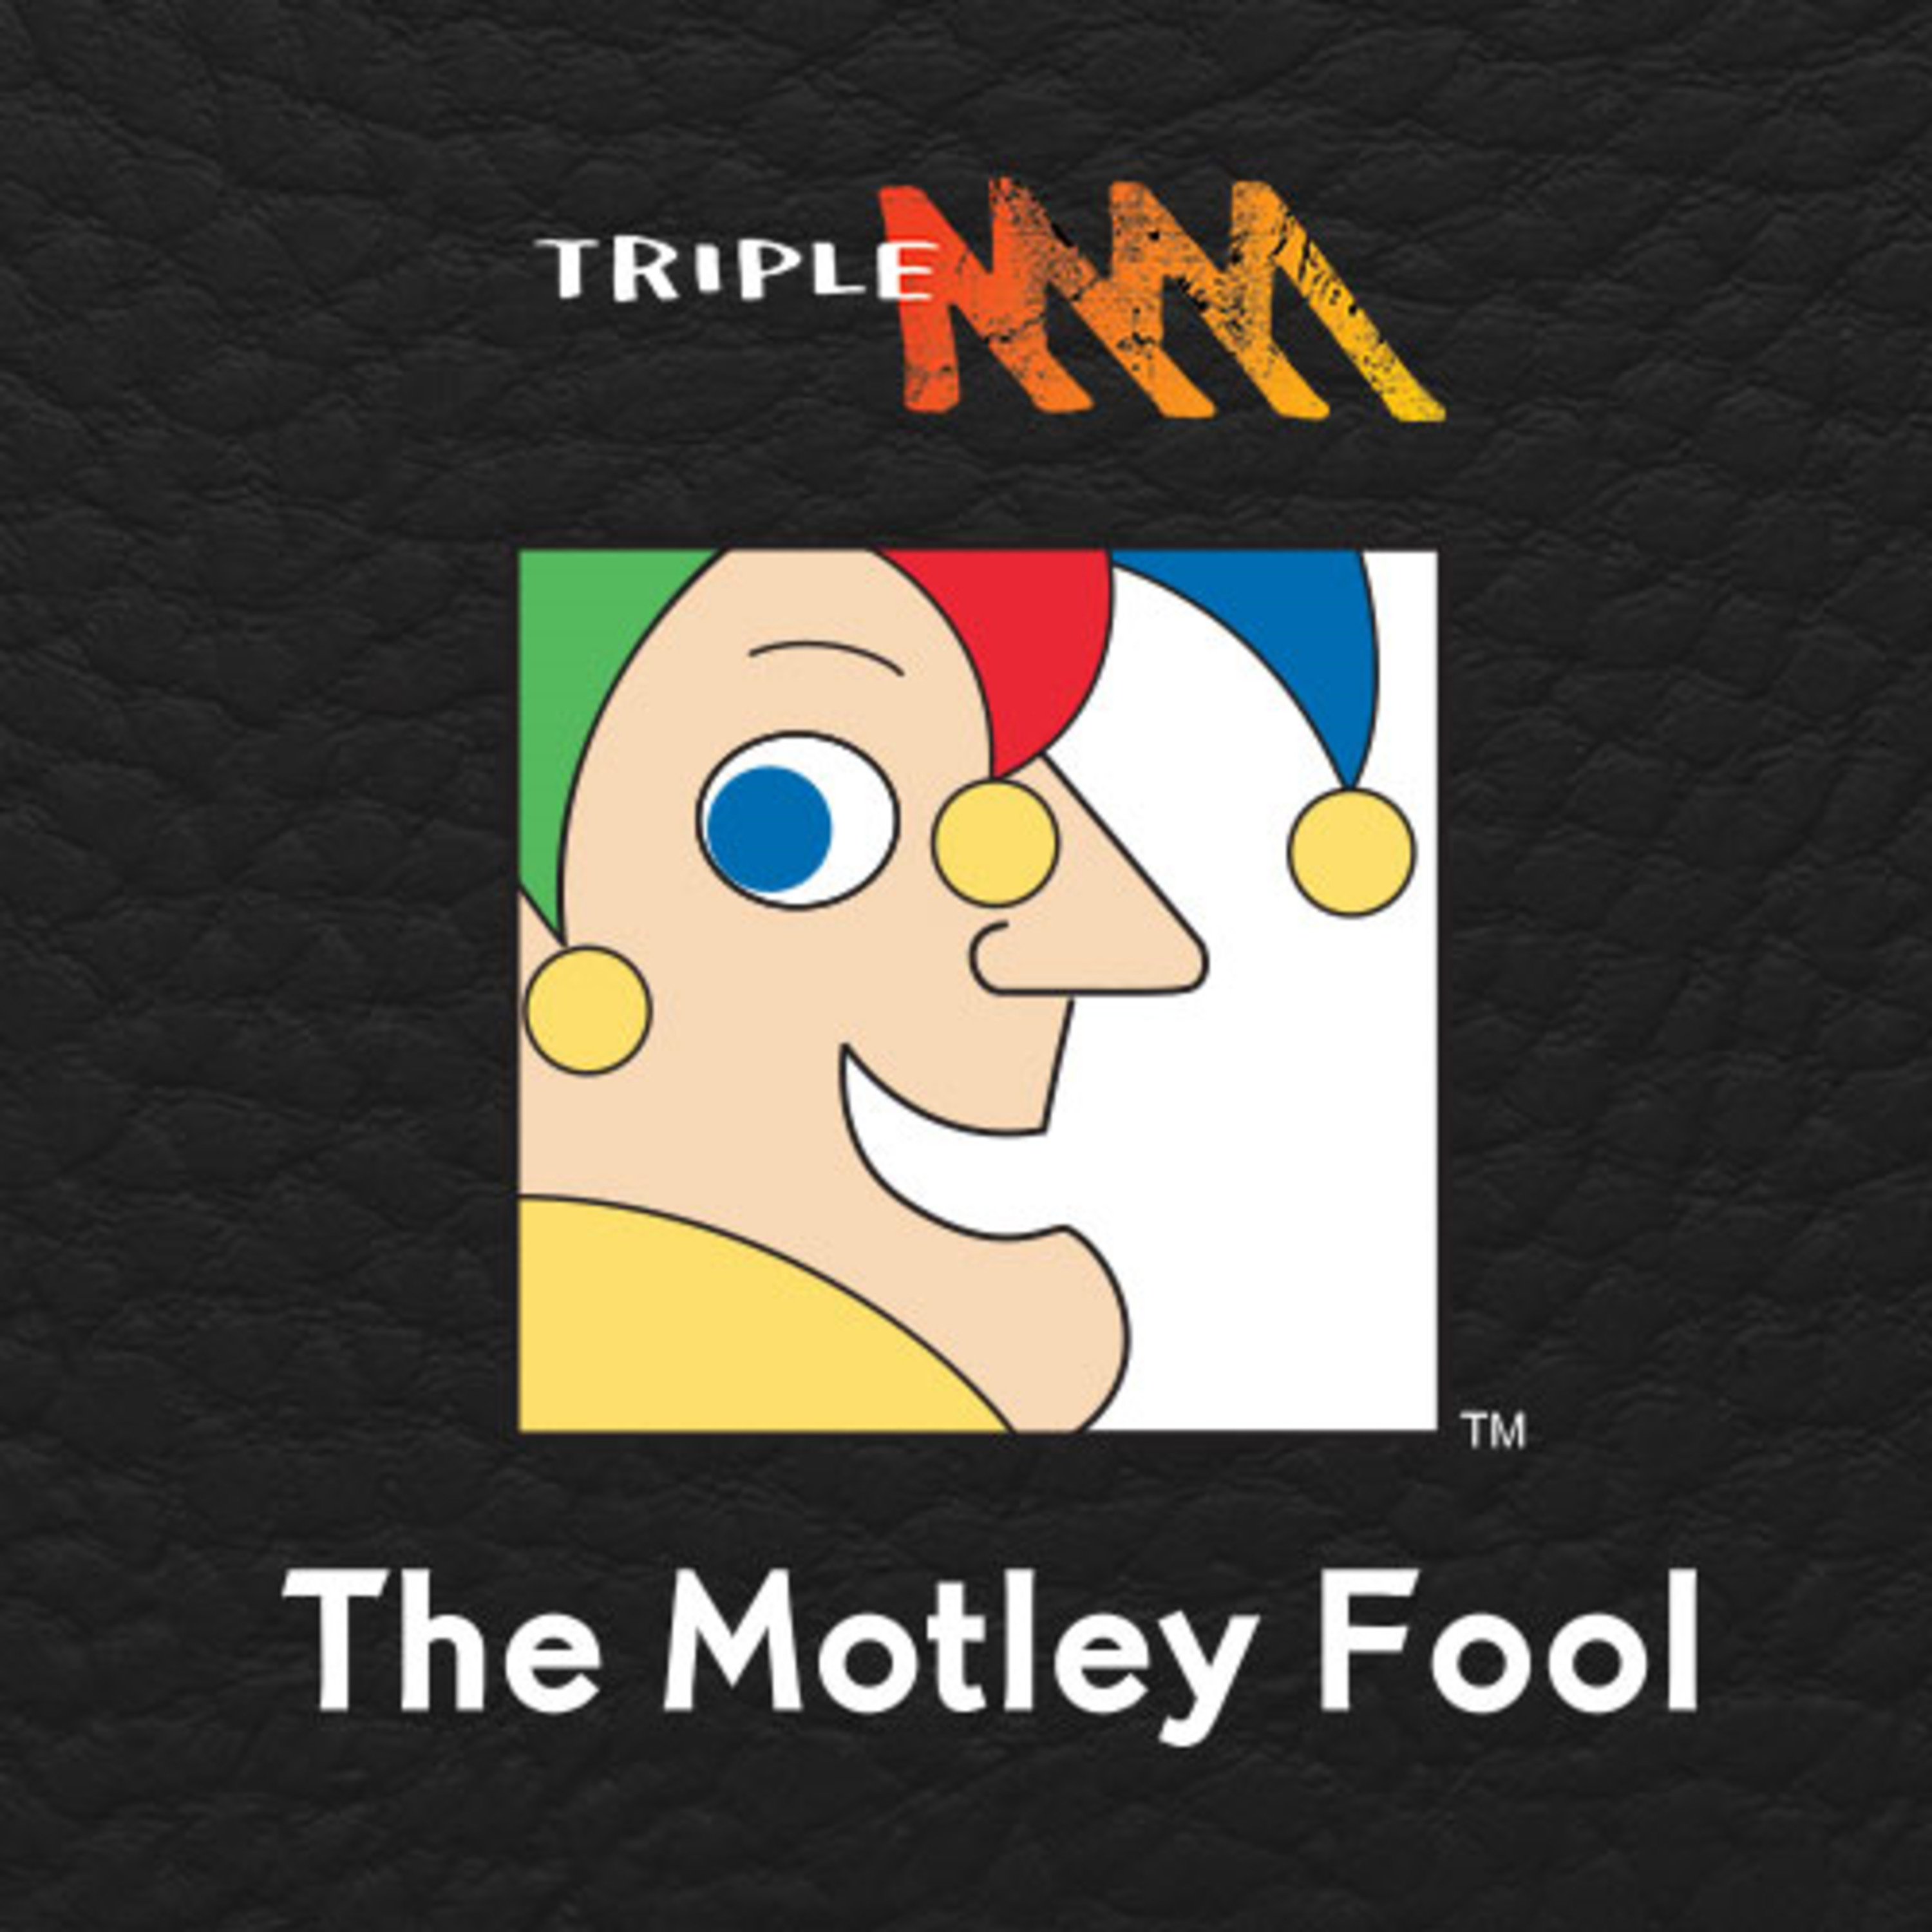 Election fallout, announcements from APRA and RBA, Scott's been thinking - Episode 154 May 24 - Triple M's Motley Fool Money